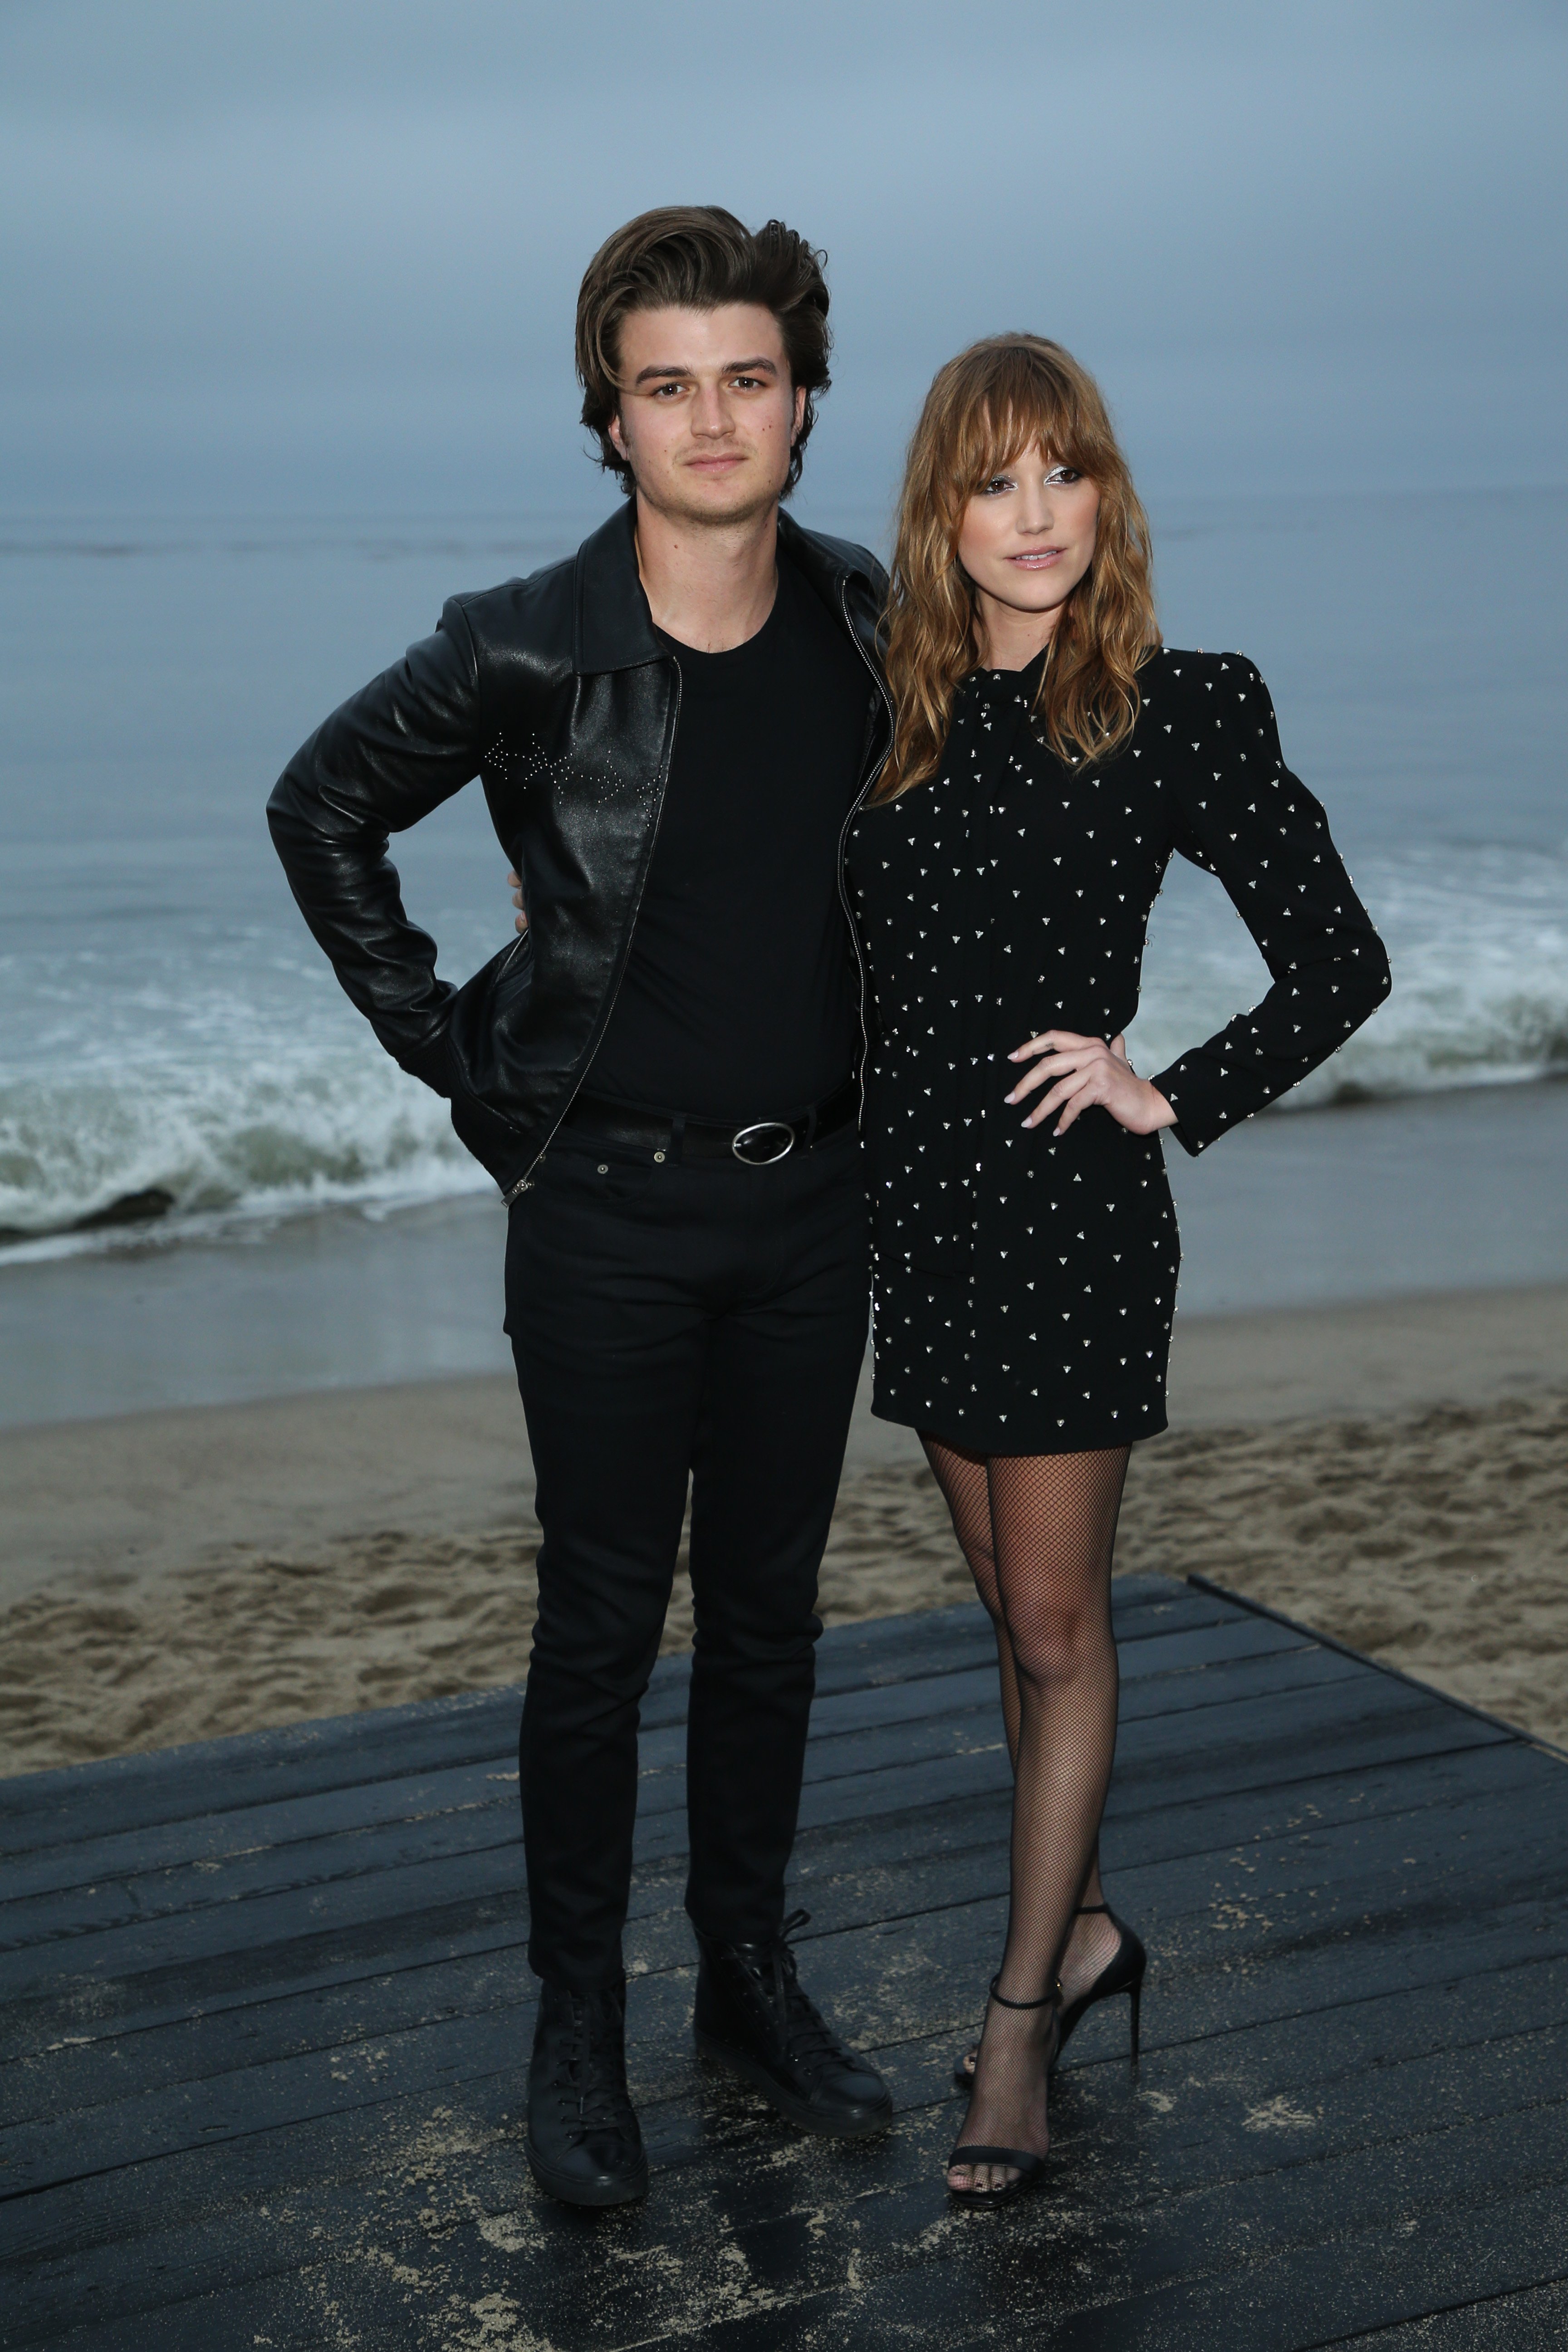 Joe Keery and Maika Monroe attend the Saint Laurent Men's Spring Summer 20 Show on June 6, 2019, in Malibu, California. | Source: Getty Images